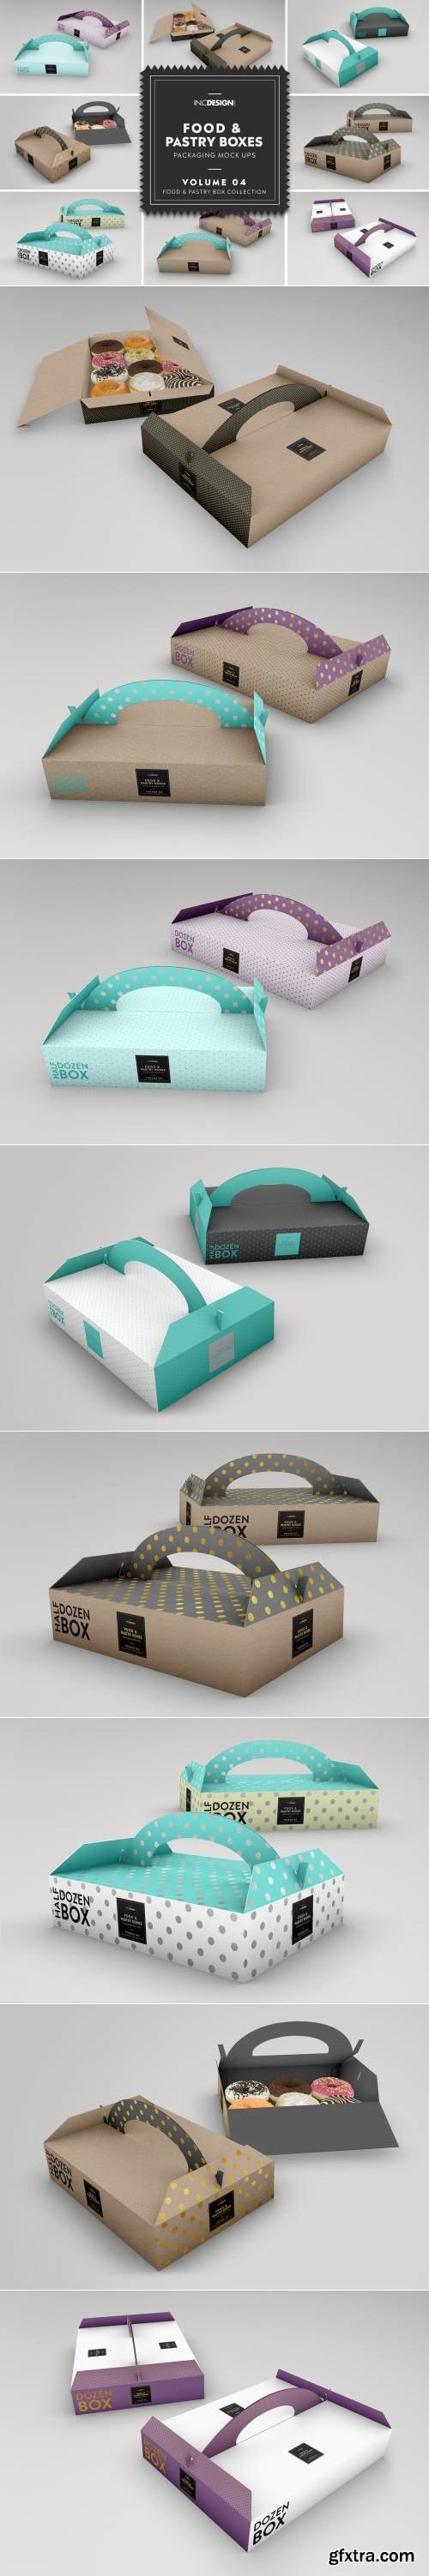 Food Pastry Boxes Vol.4: Packaging Mockups